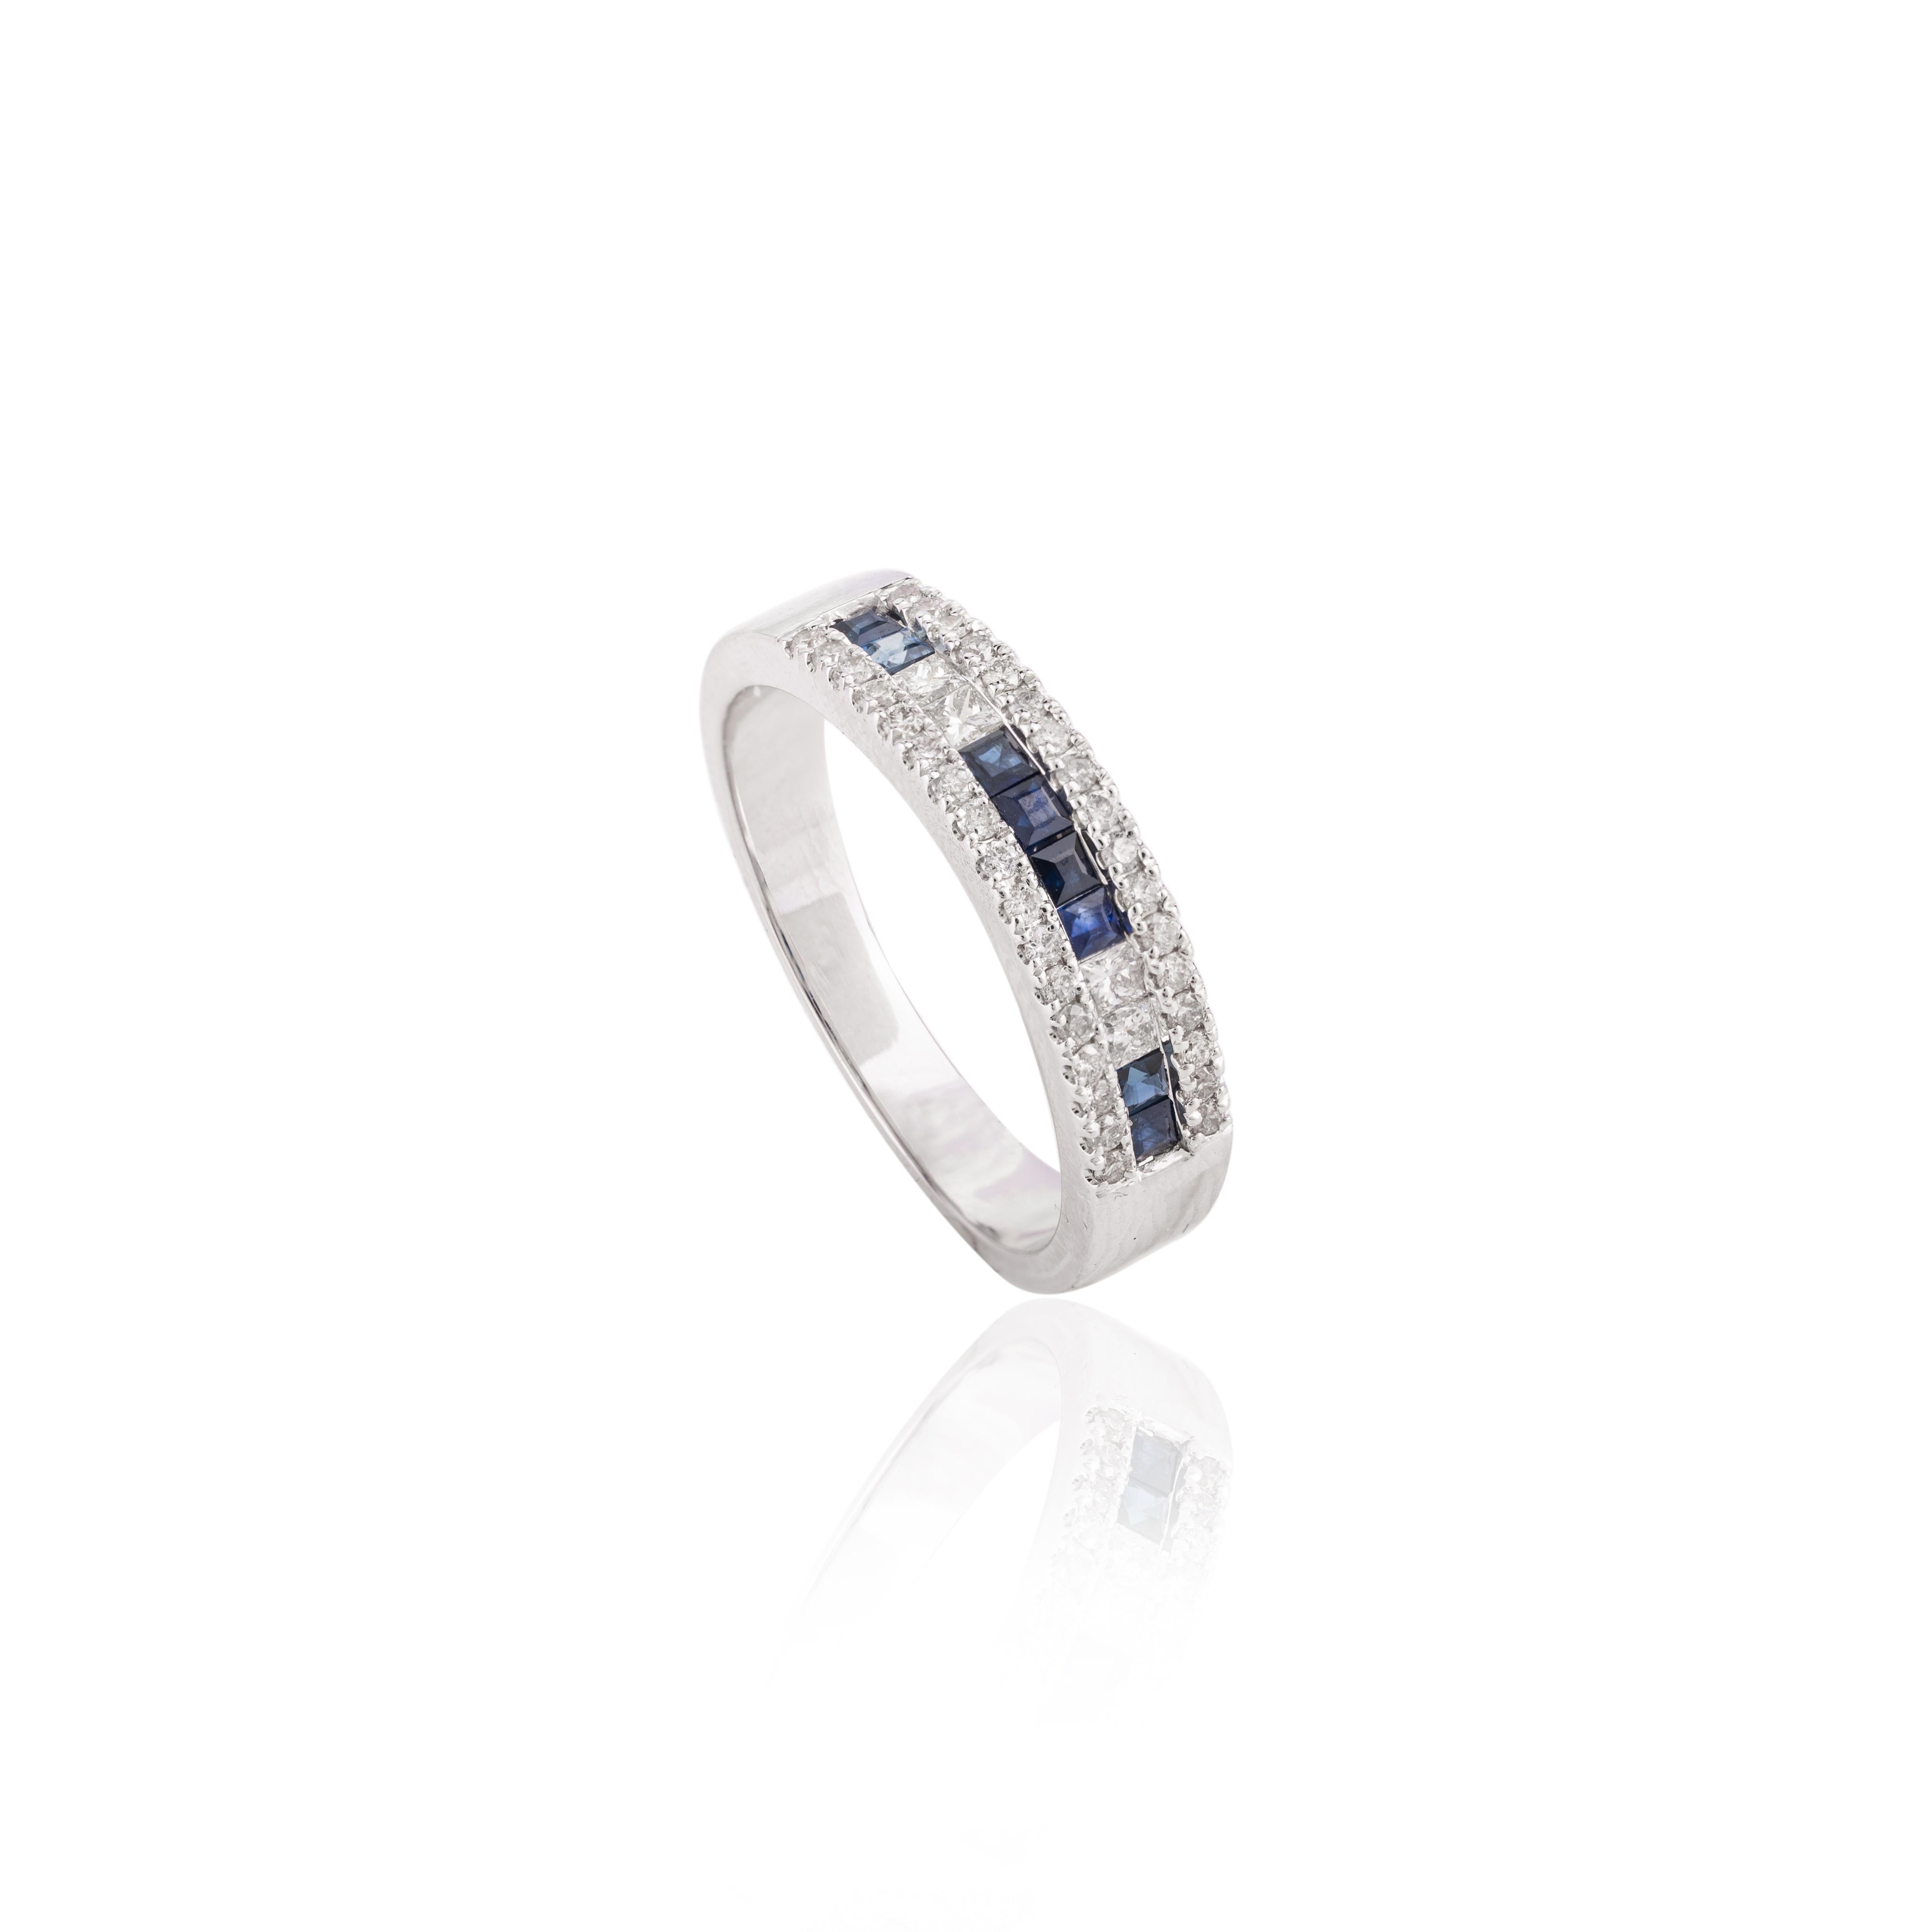 For Sale:  Stunning Blue Sapphire Diamond Engagement Band Ring for Her in 18k White Gold 9